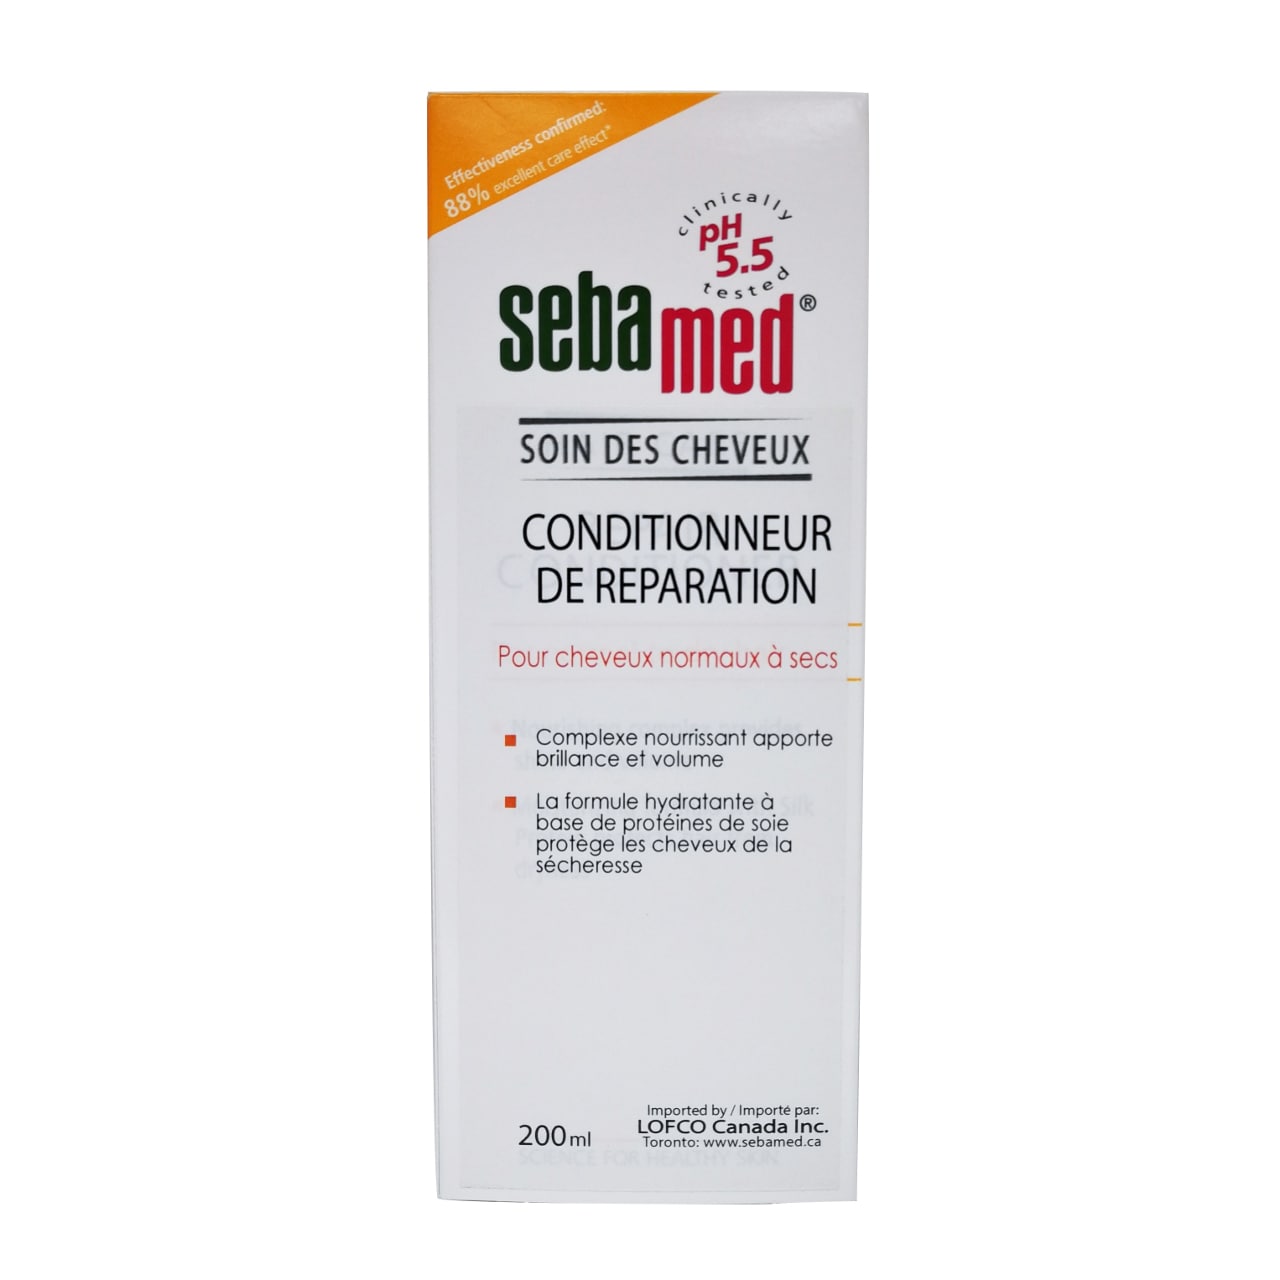 Product label for Sebamed Hair Care Repair Conditioner in French